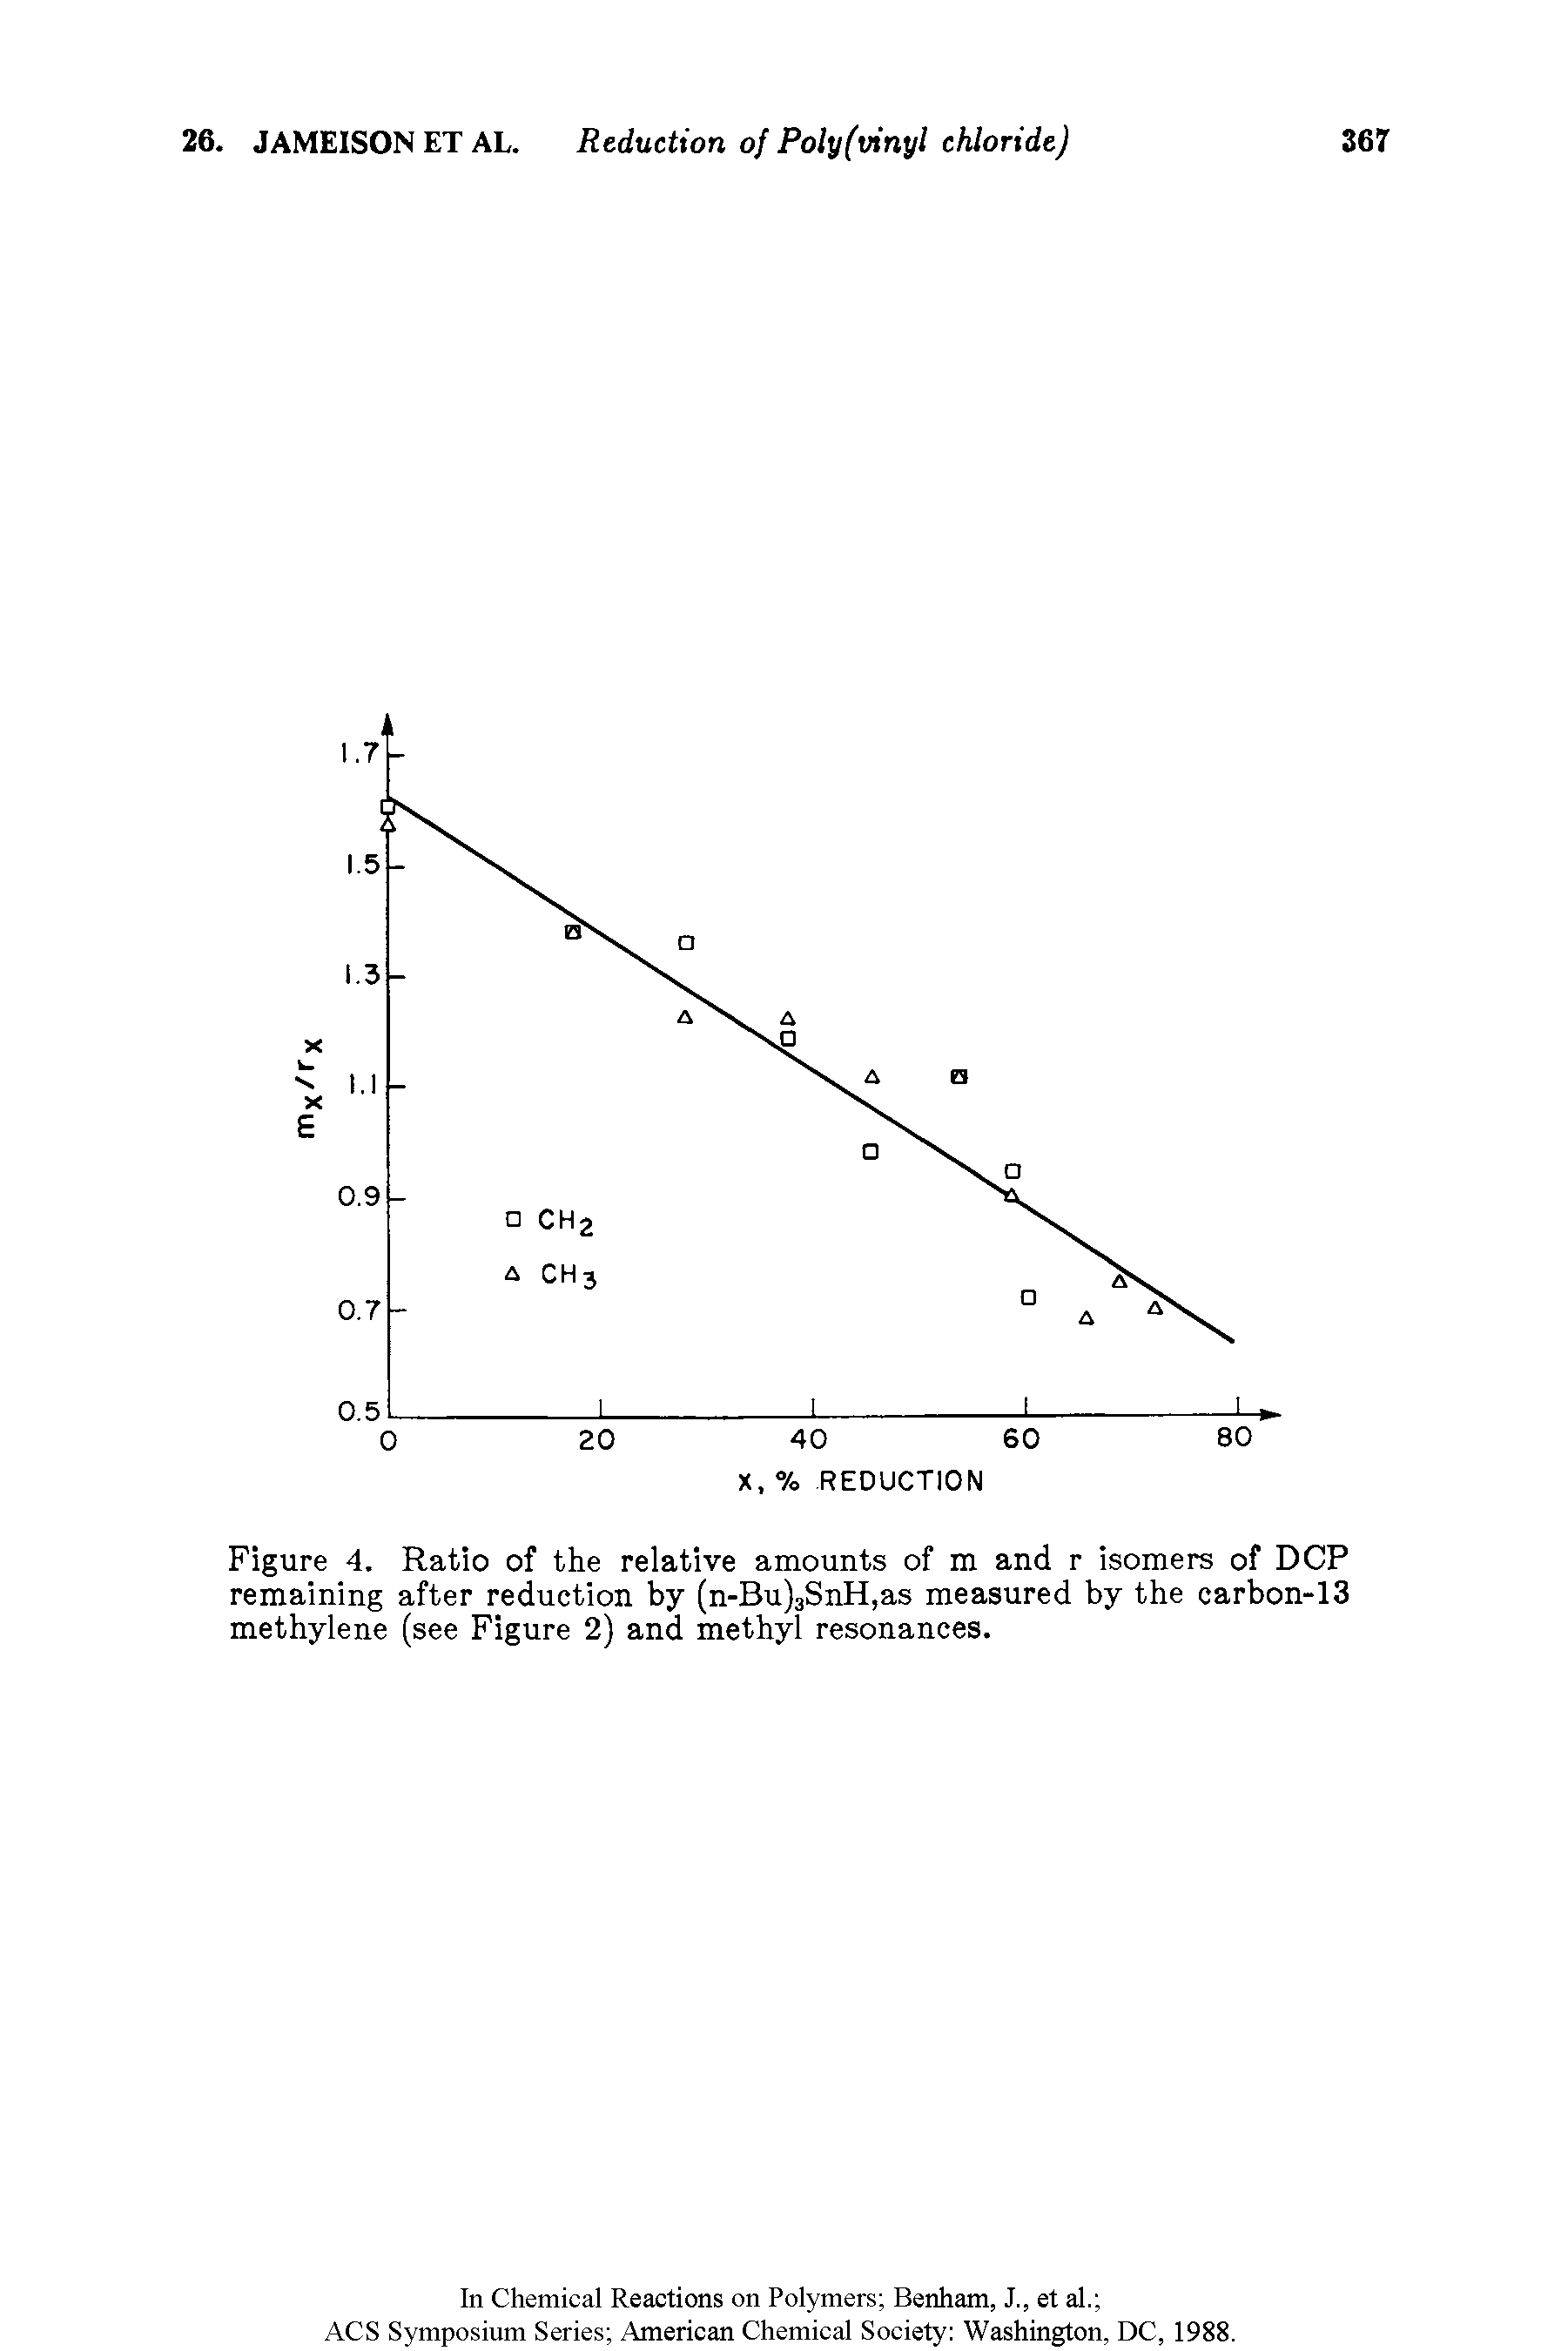 Figure 4. Ratio of the relative amounts of m and r isomers of DCP remaining after reduction by (n-Bu)3SnH,as measured by the carbon-13 methylene (see Figure 2) and methyl resonances.